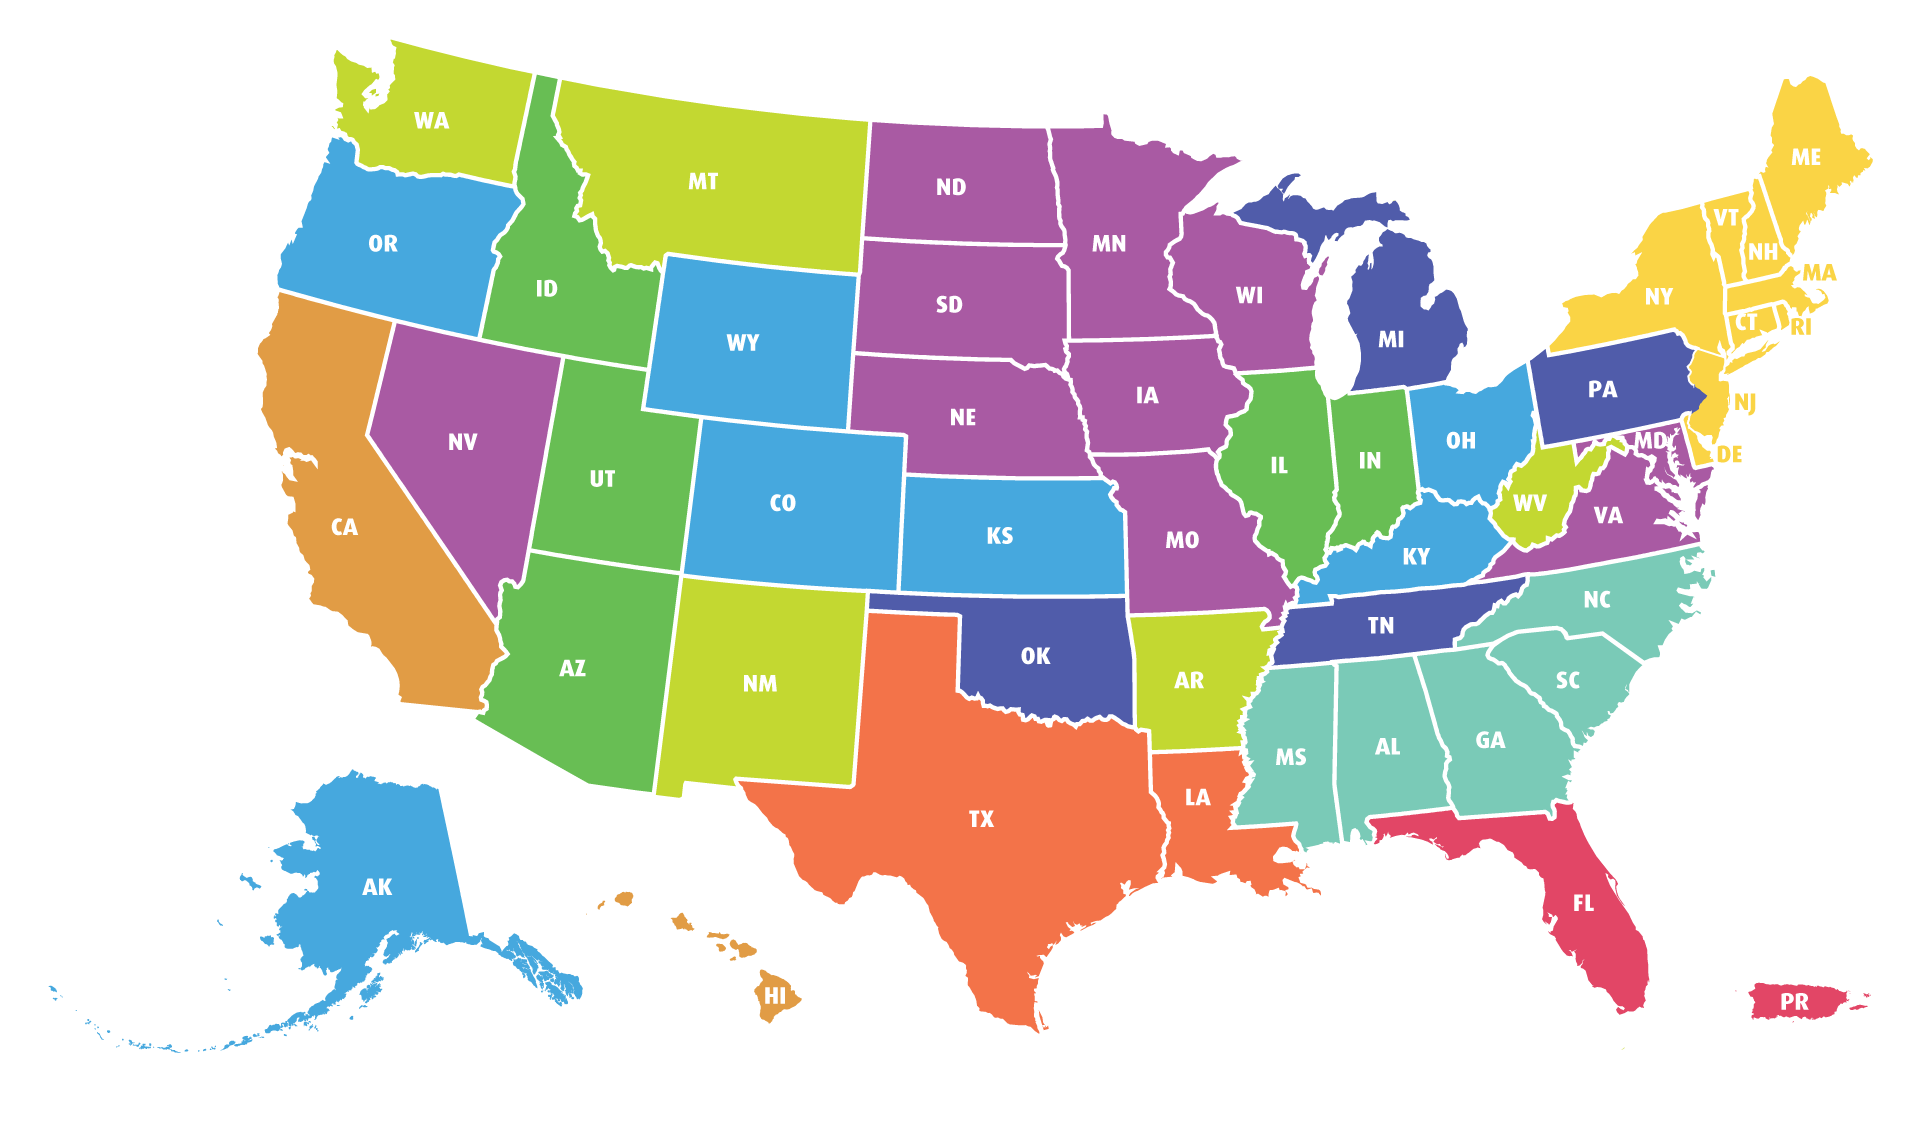 image of color-coded United States map with each state color representing coverage by a Homecare sales rep